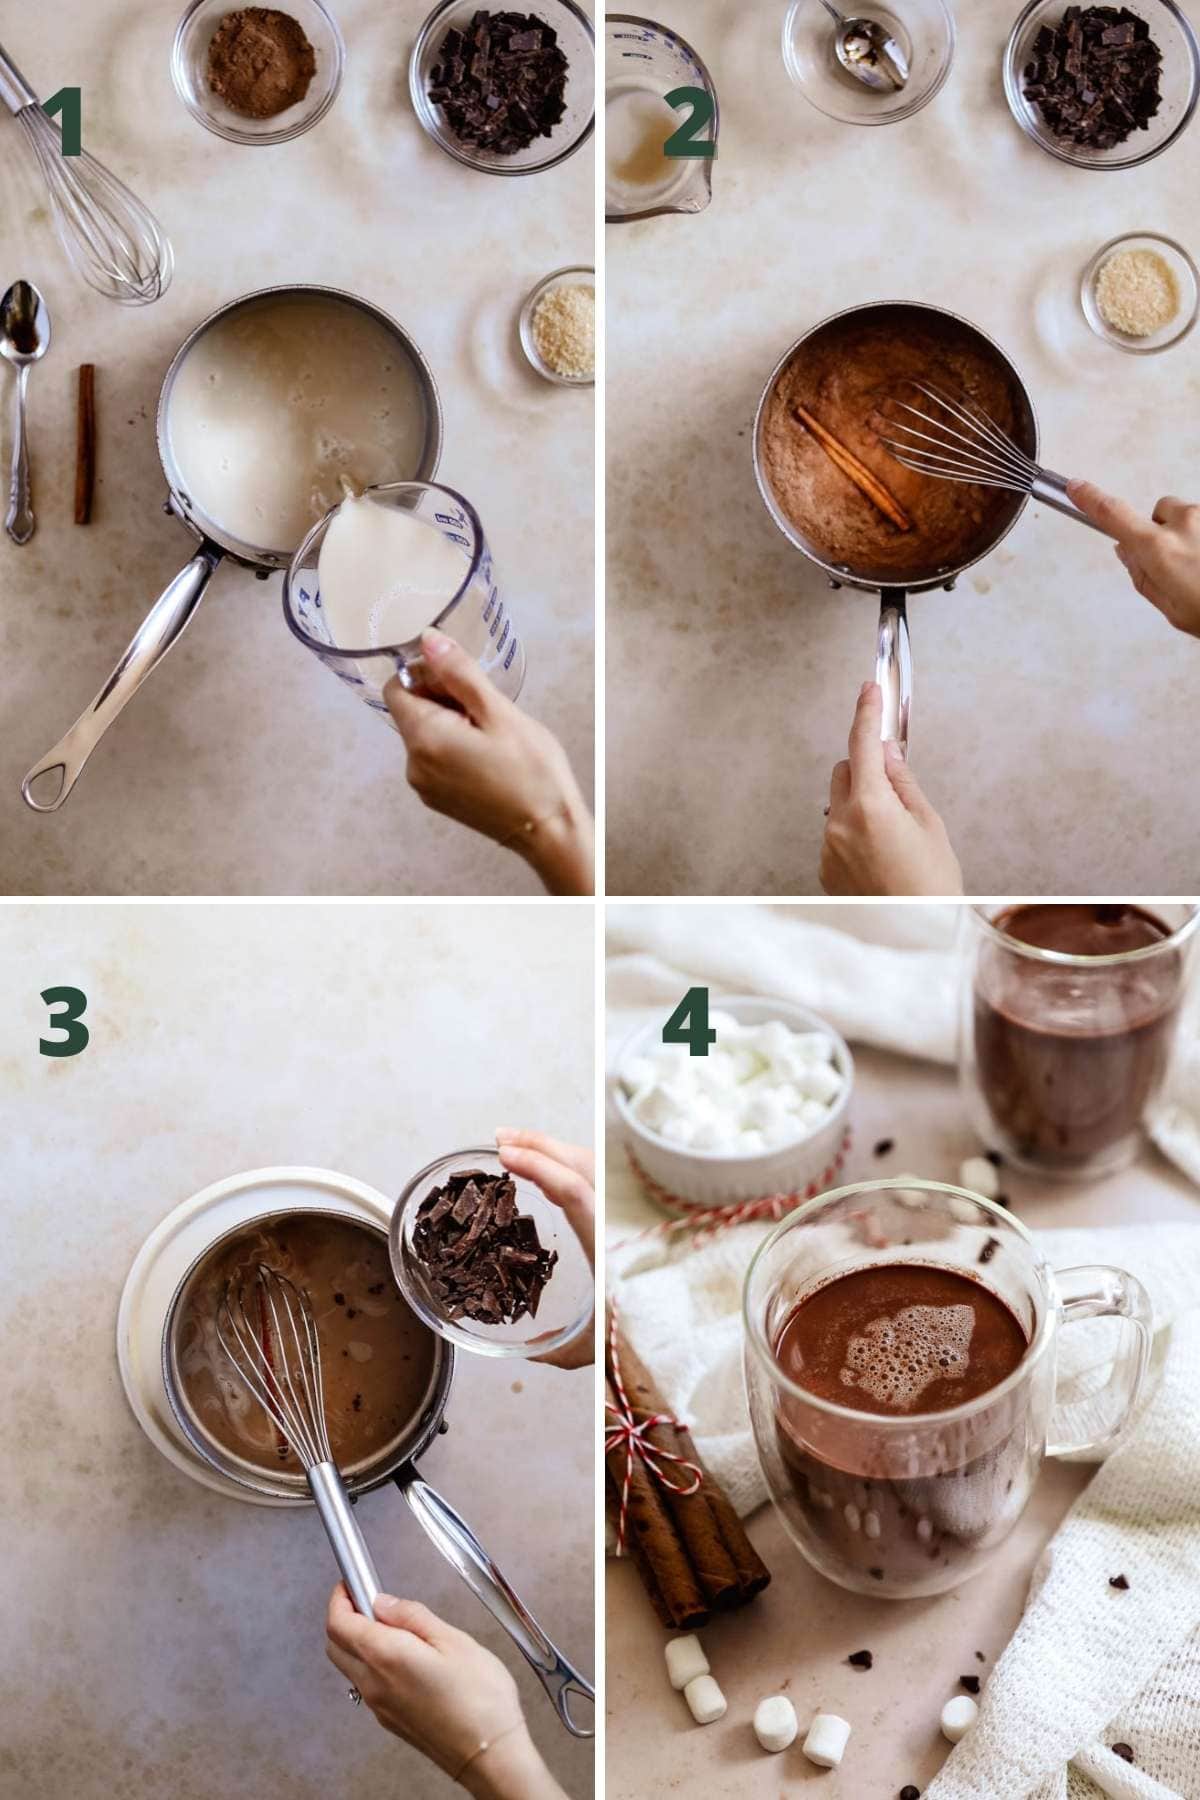 Steps to make oat milk hot chocolate in a saucepan with oat milk, cocoa powder, chocolate, vanilla, and cinnamon served in double-wall glass mugs.